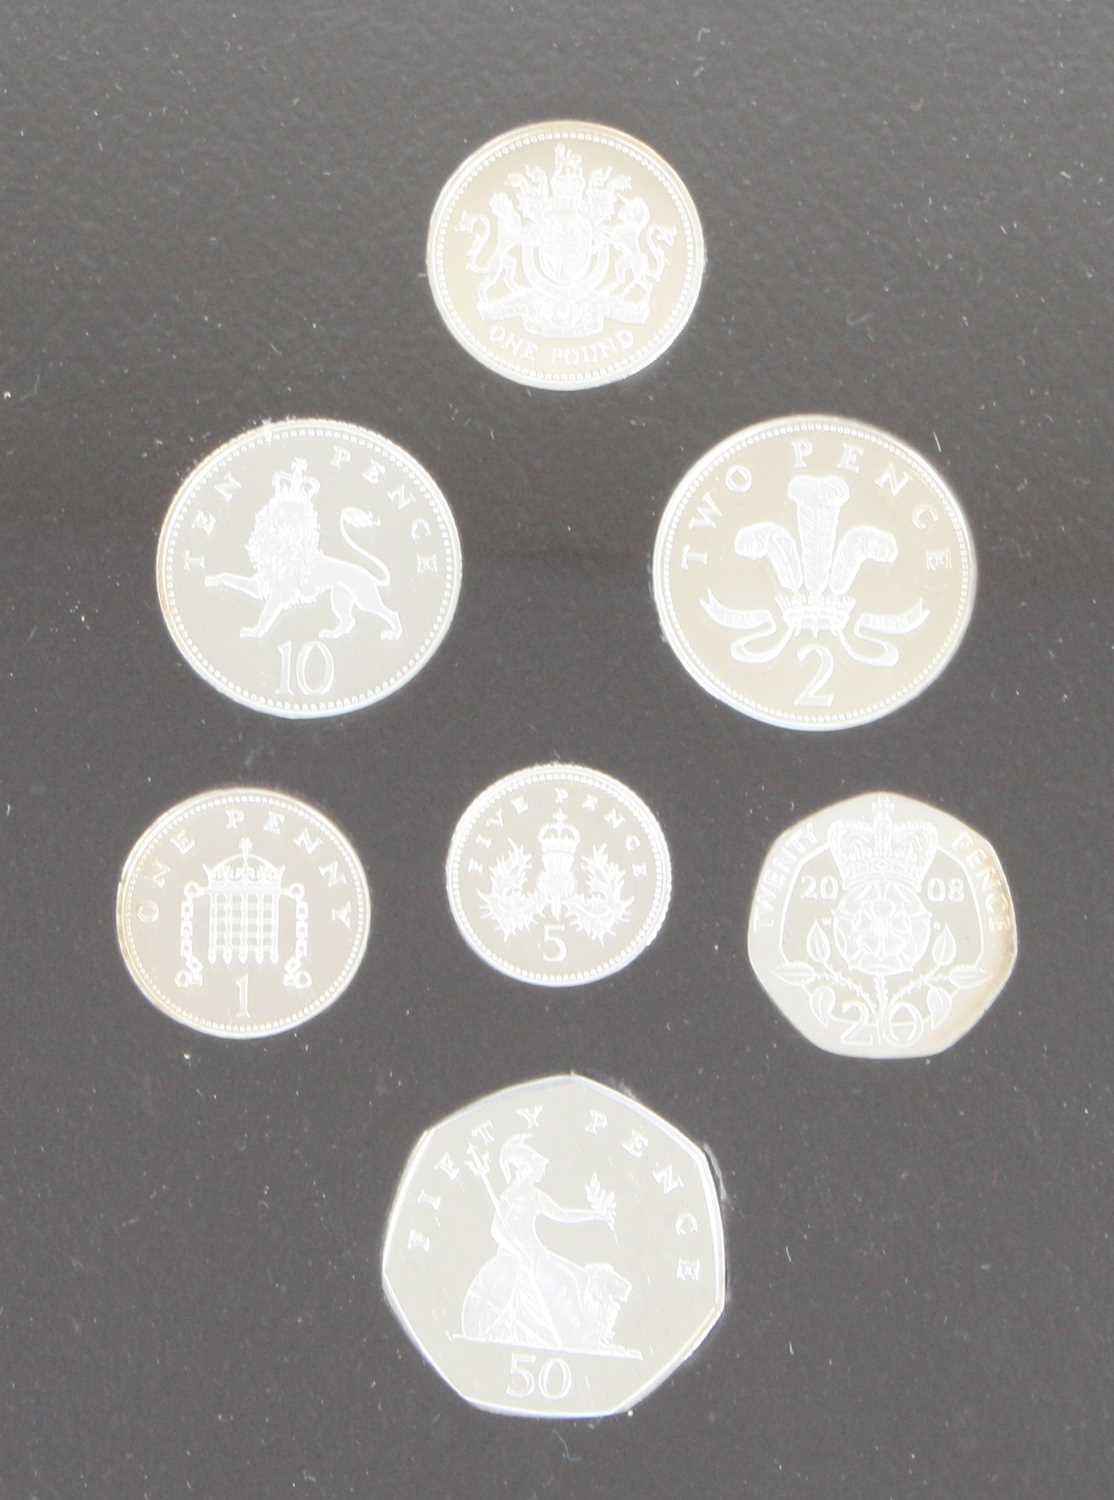 The Royal Mint, 2008 United Kingdom Coinage Emblems of Britain Silver Proof Collection, seven silver - Image 2 of 2